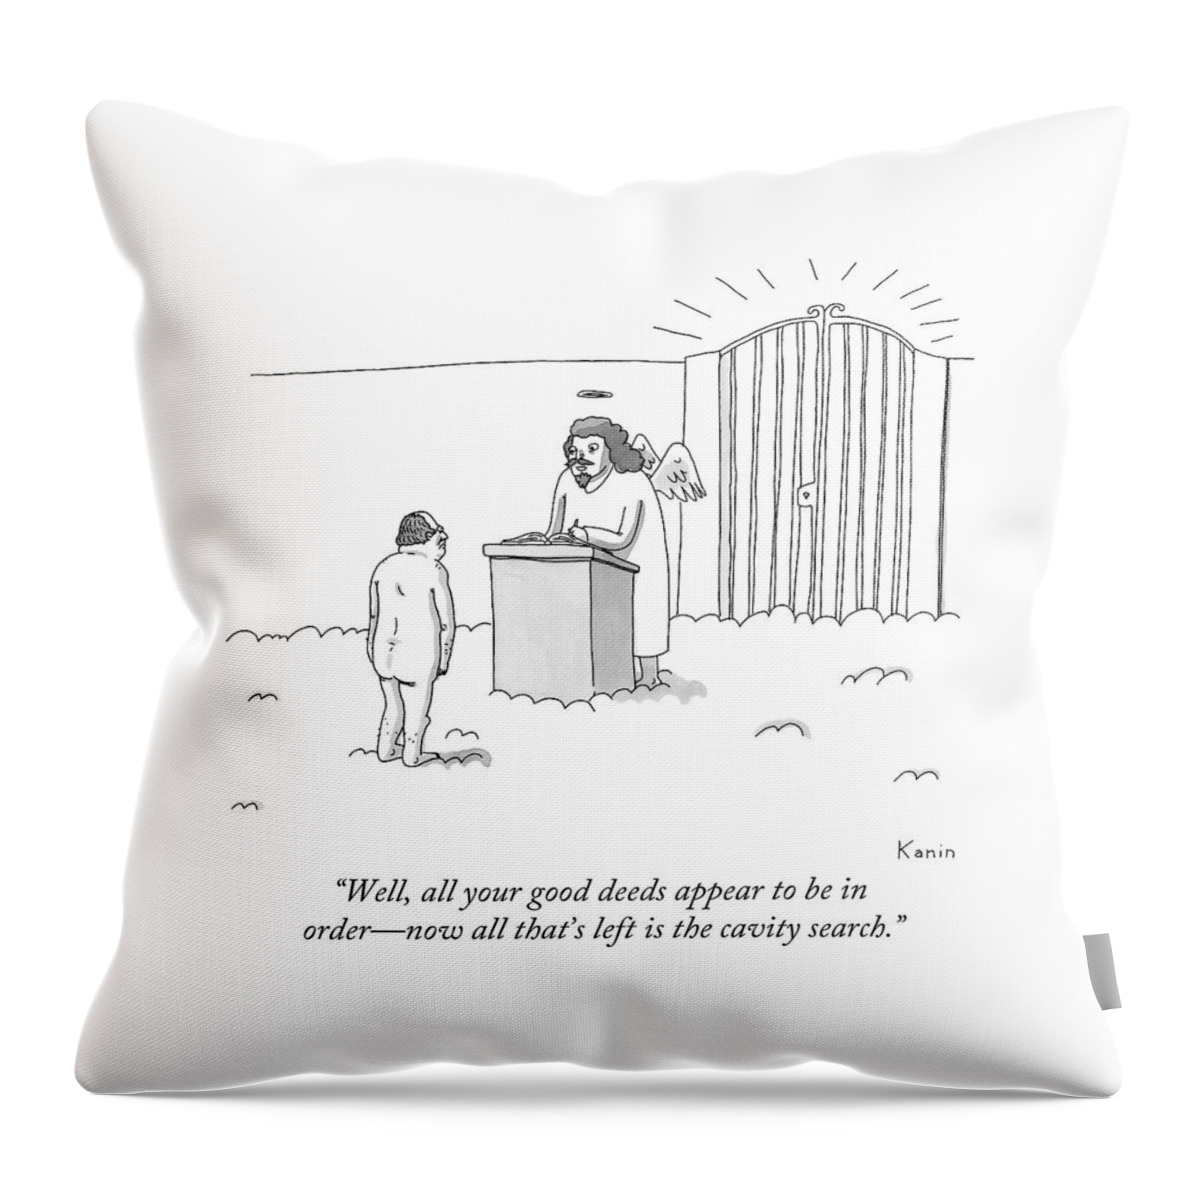 Well, All Your Good Deeds Appear To Be In Order - Throw Pillow